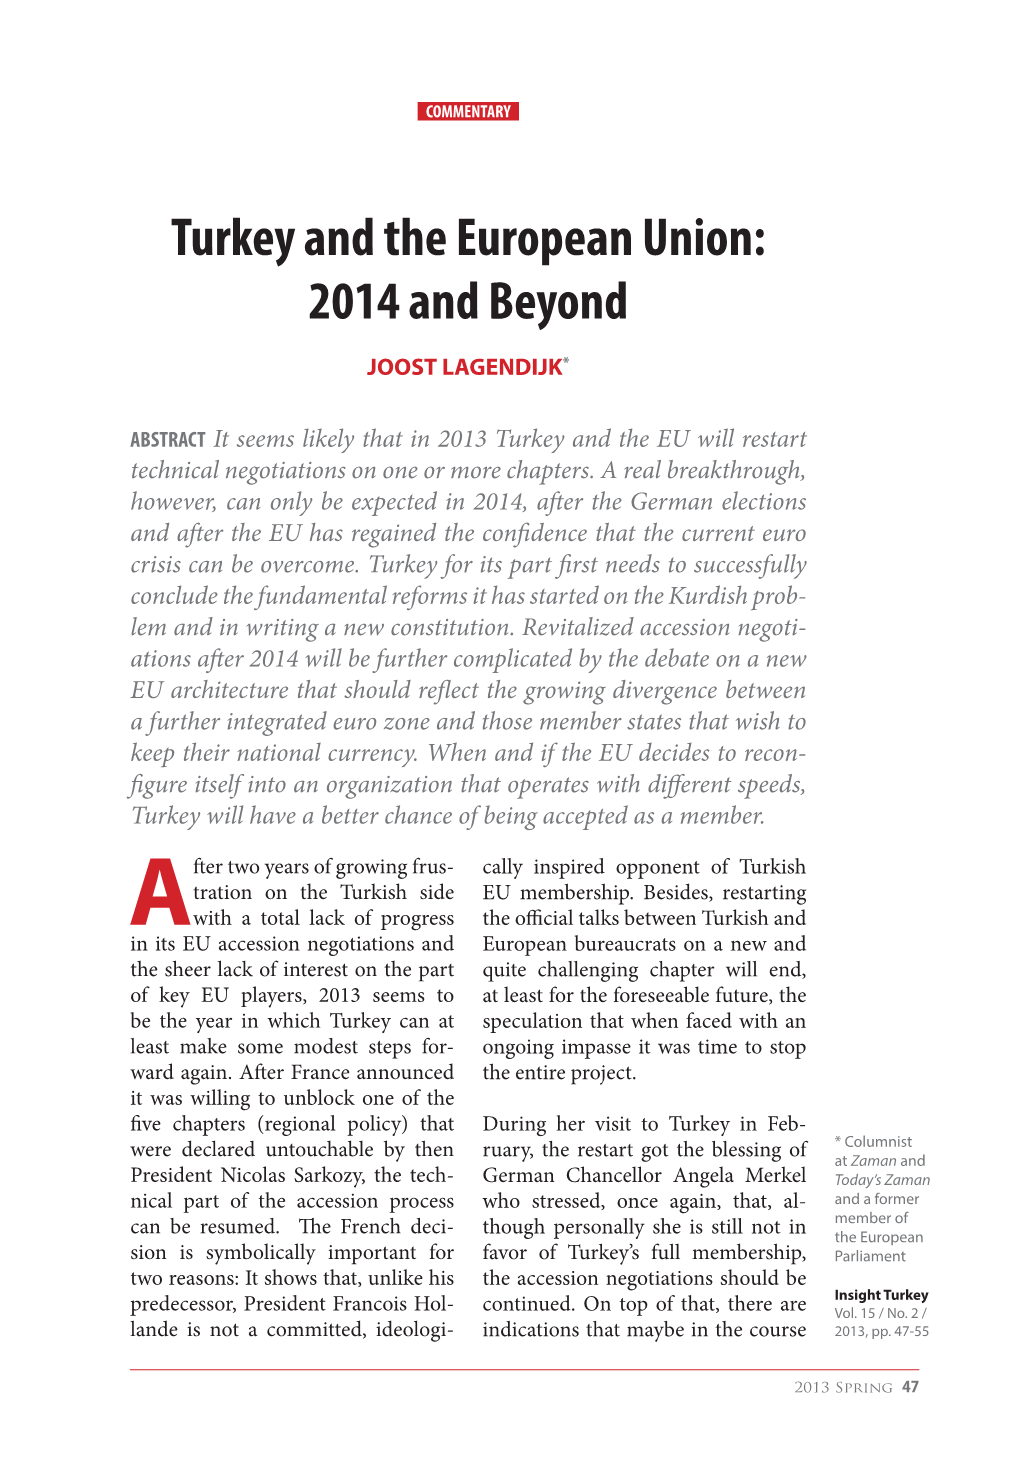 Turkey and the European Union: 2014 and Beyond